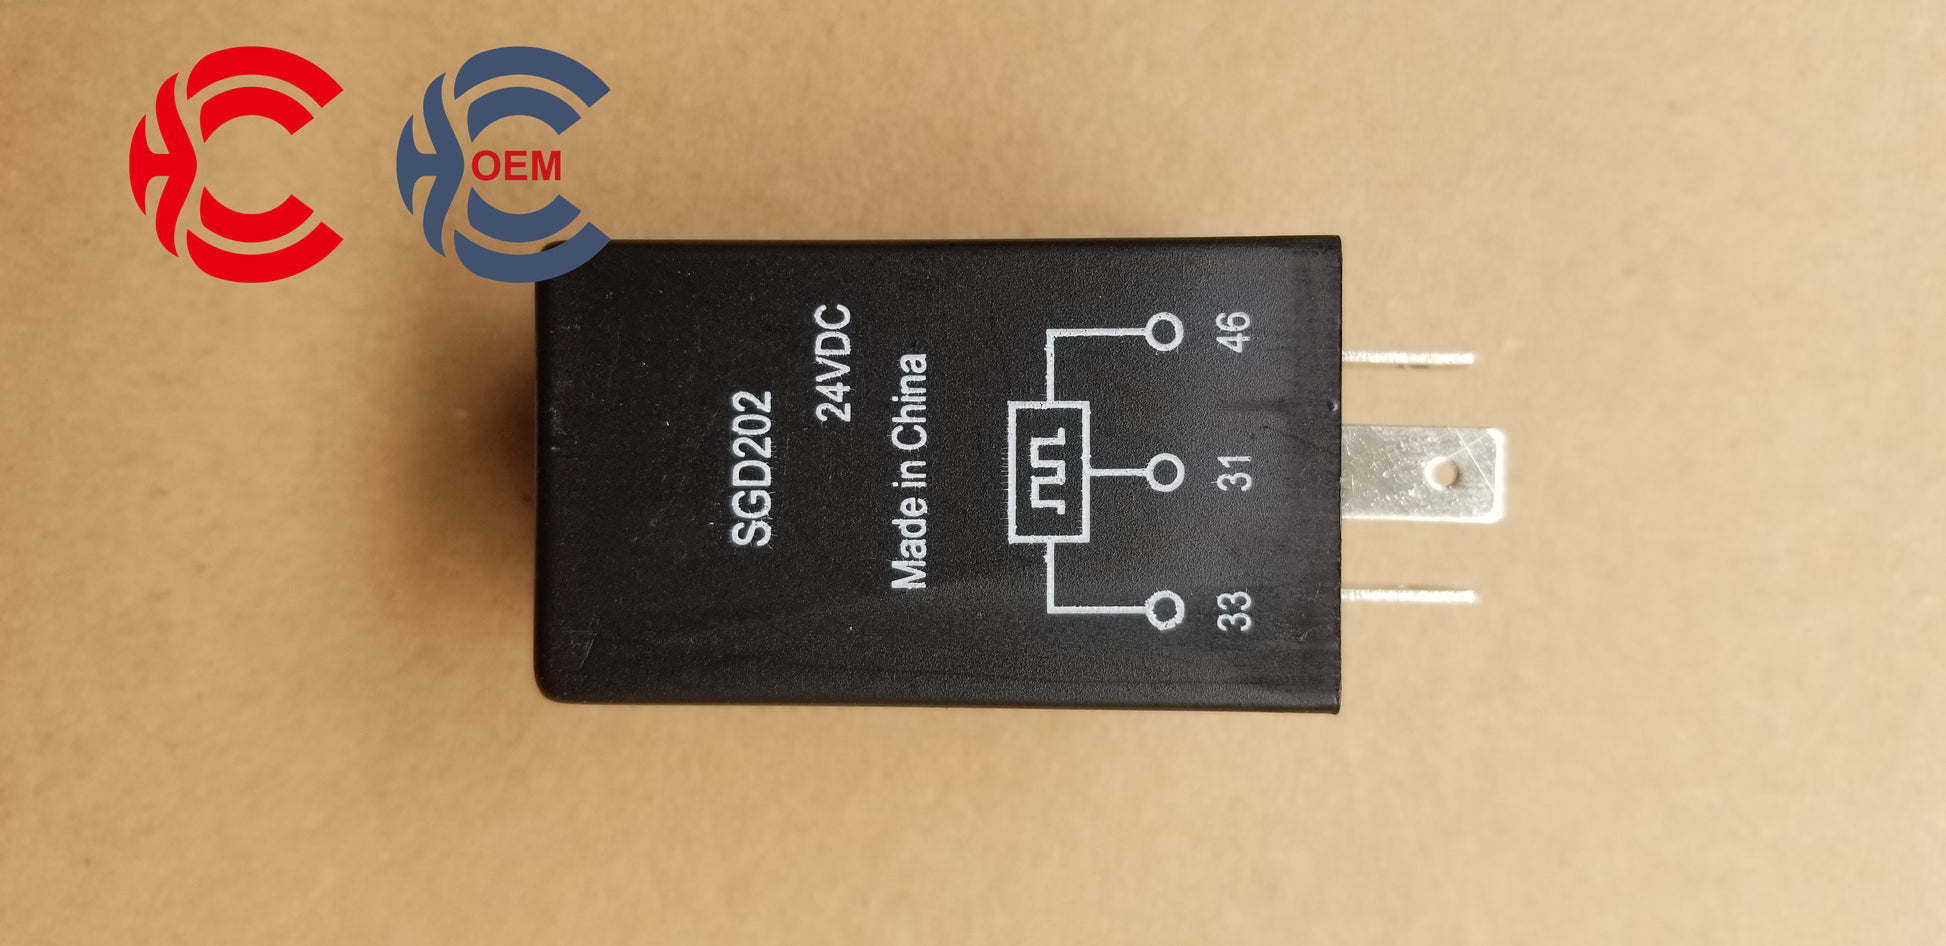 OEM: SGD202Material: ABS Color: black Origin: Made in ChinaWeight: 50gPacking List: 1* Flash Relay More ServiceWe can provide OEM Manufacturing serviceWe can Be your one-step solution for Auto PartsWe can provide technical scheme for you Feel Free to Contact Us, We will get back to you as soon as possible.